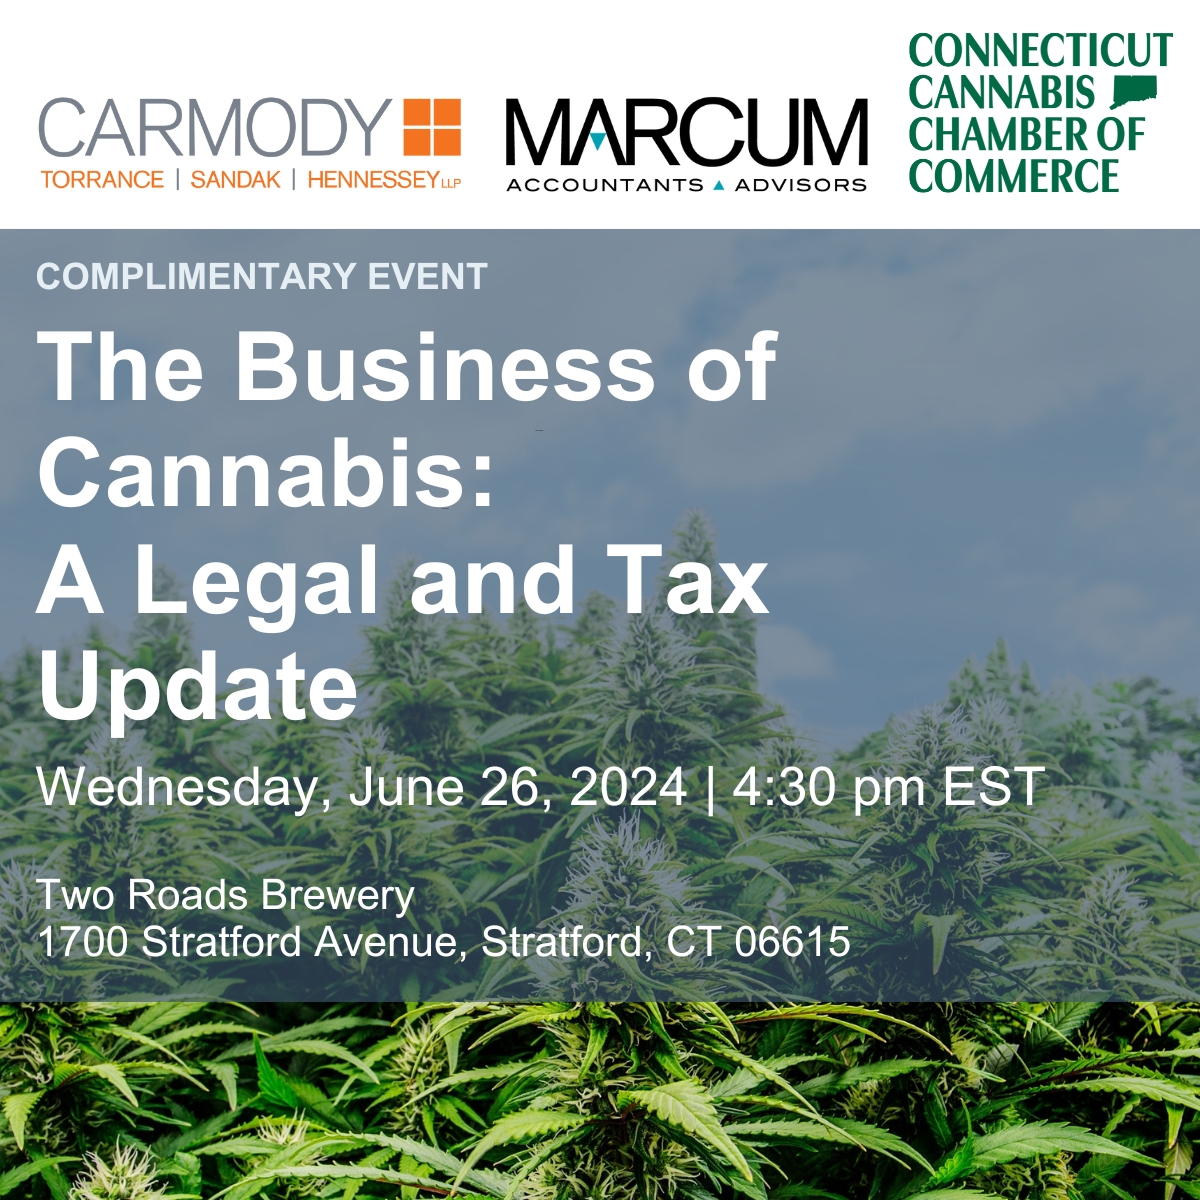 Join Carmody and Marcum for an engaging discussion on the legal and tax updates in cannabis law, moderated by Adam Wood, President & Founder of the Connecticut Cannabis Chamber of Commerce, followed by an opportunity to network. 

Register now: marcumevents.com/events/the-bus…